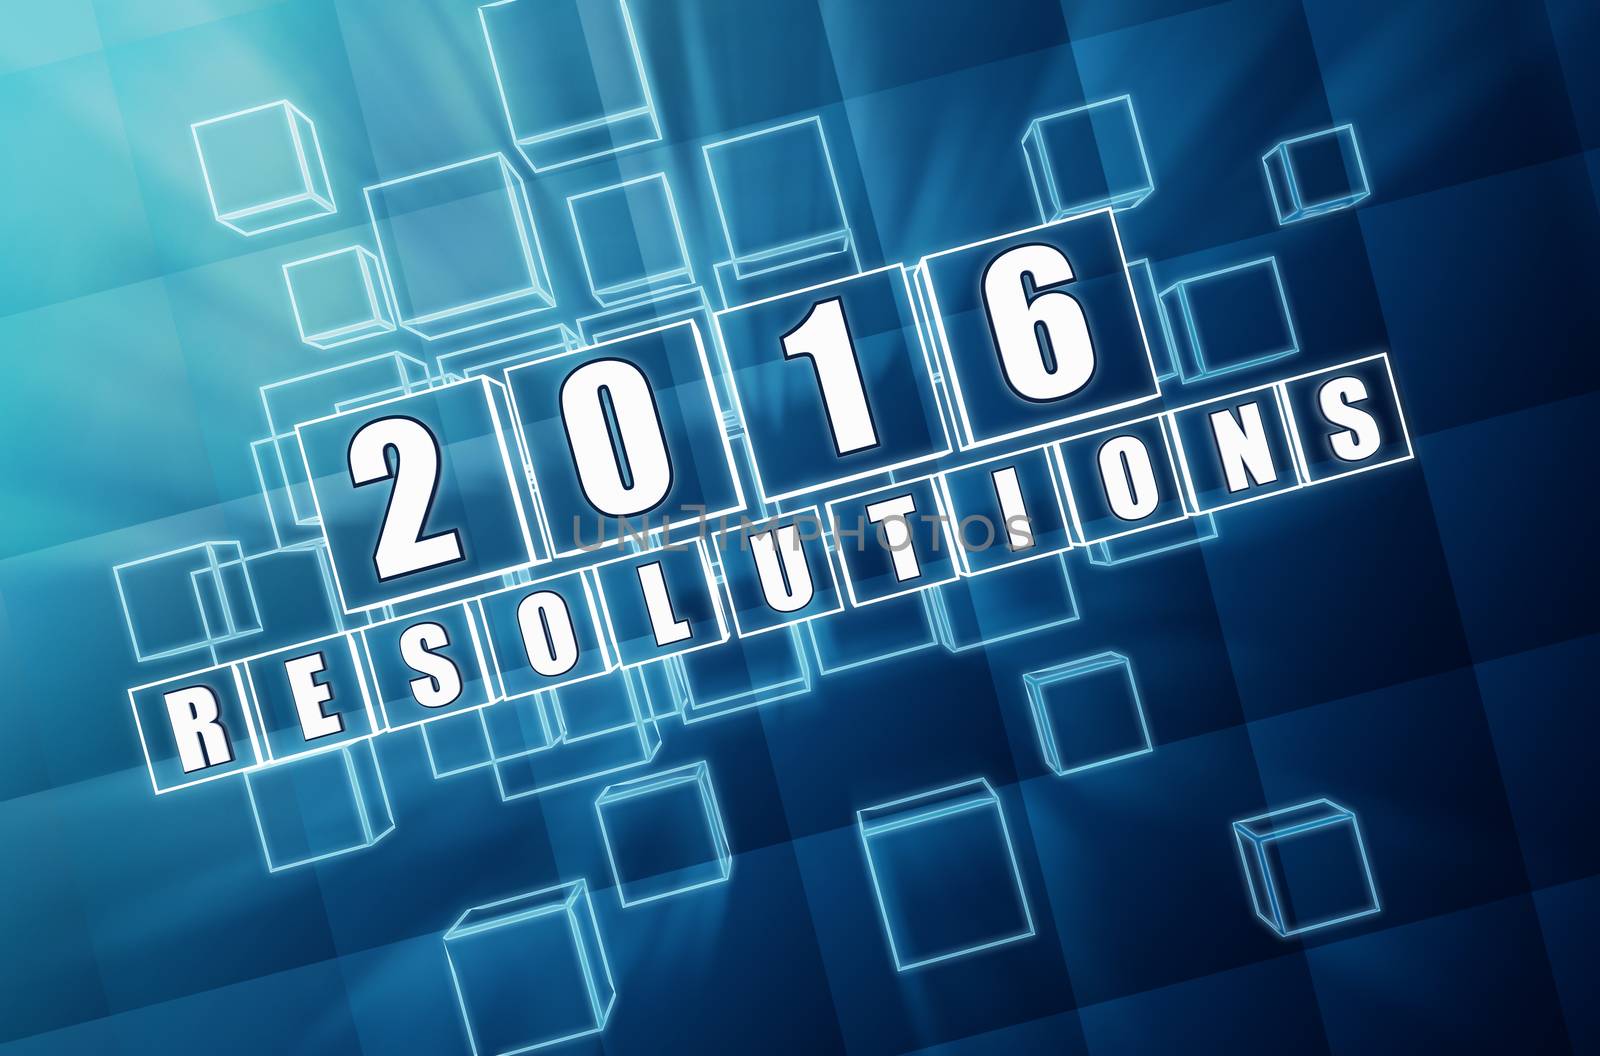 new year 2016 resolutions - text in 3d blue glass boxes with white figures, business holiday concept